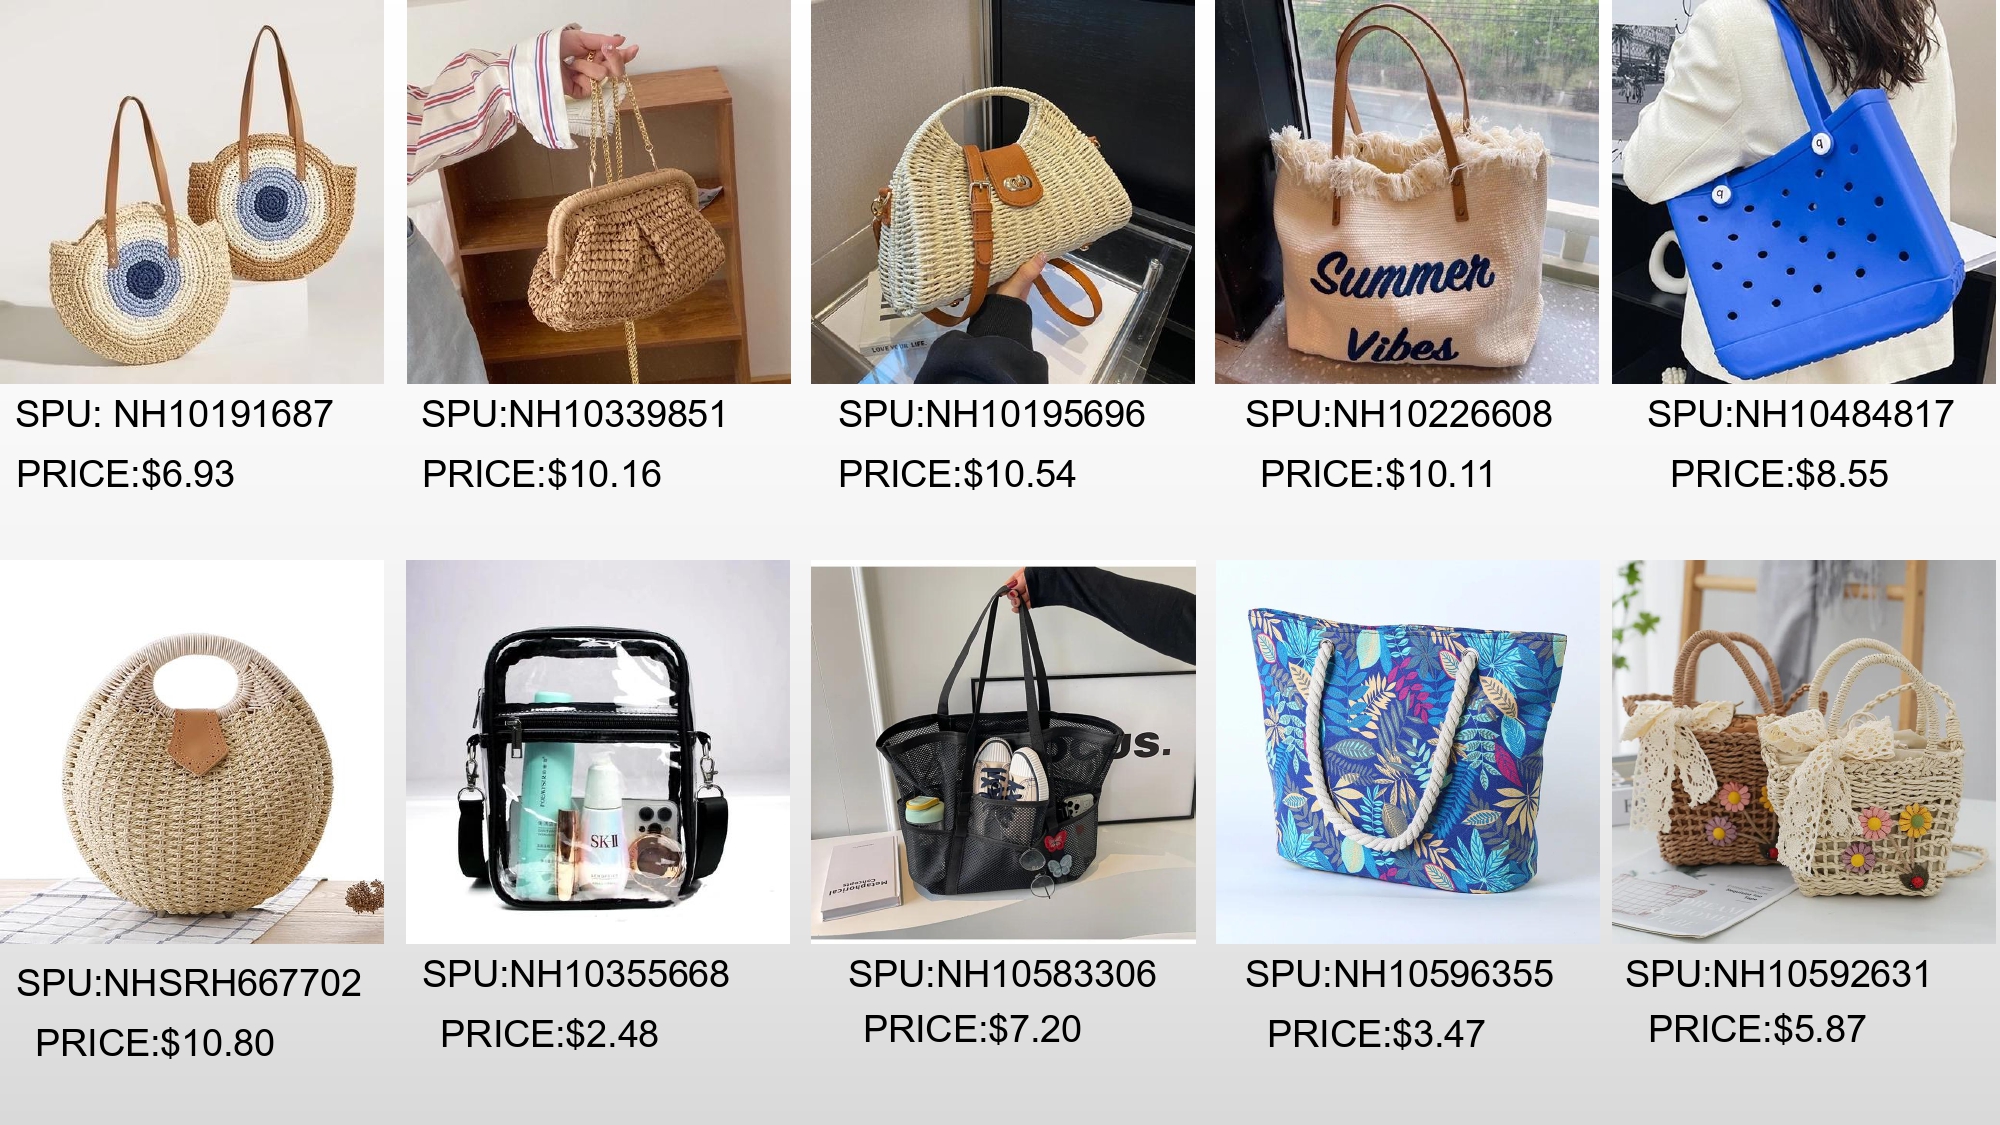 wholesale summer bags are a popular choice for businesses and retailers